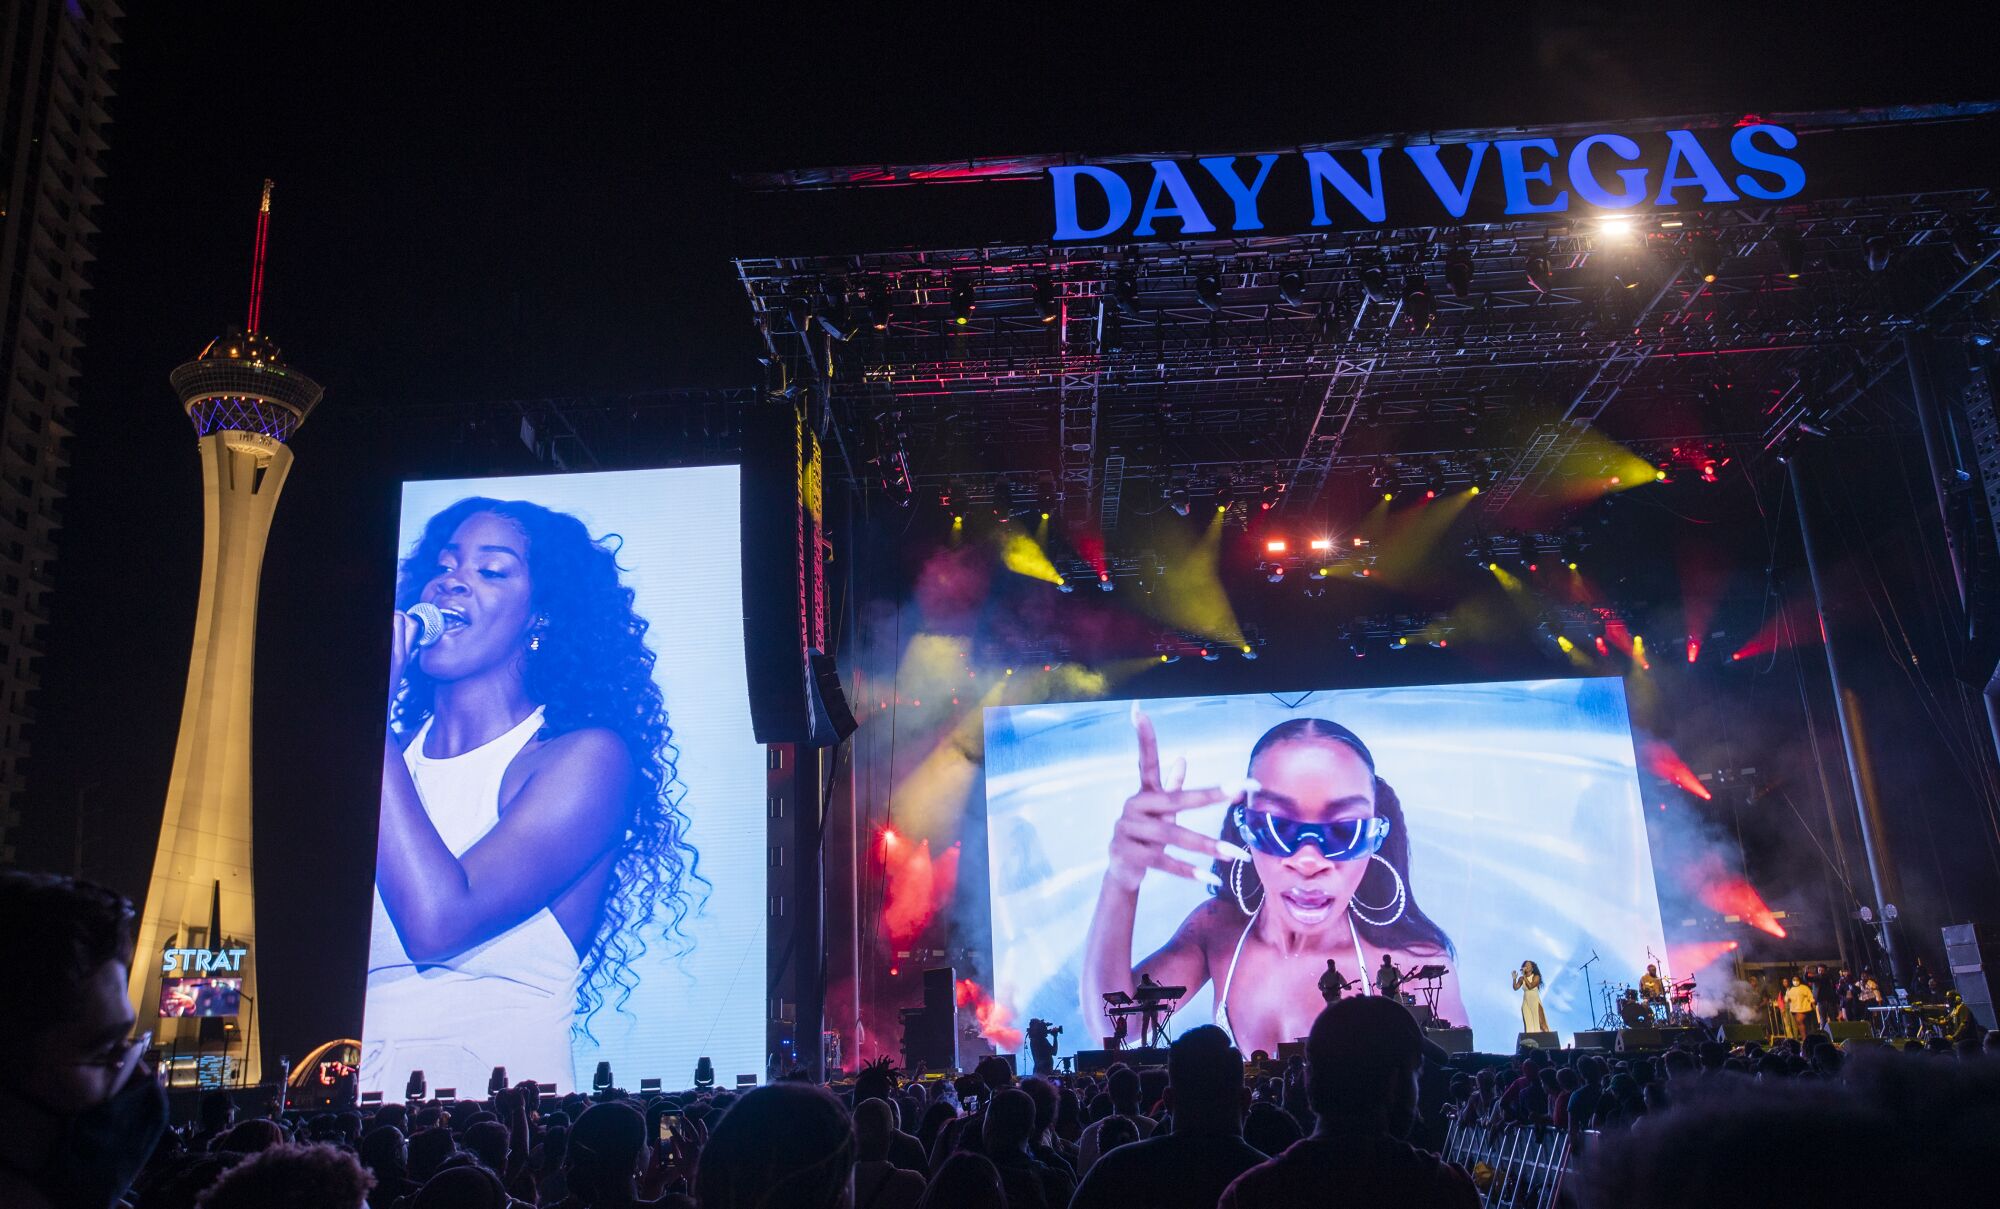 Ari Lennox performs with large screens behind the stage showing performers singing.